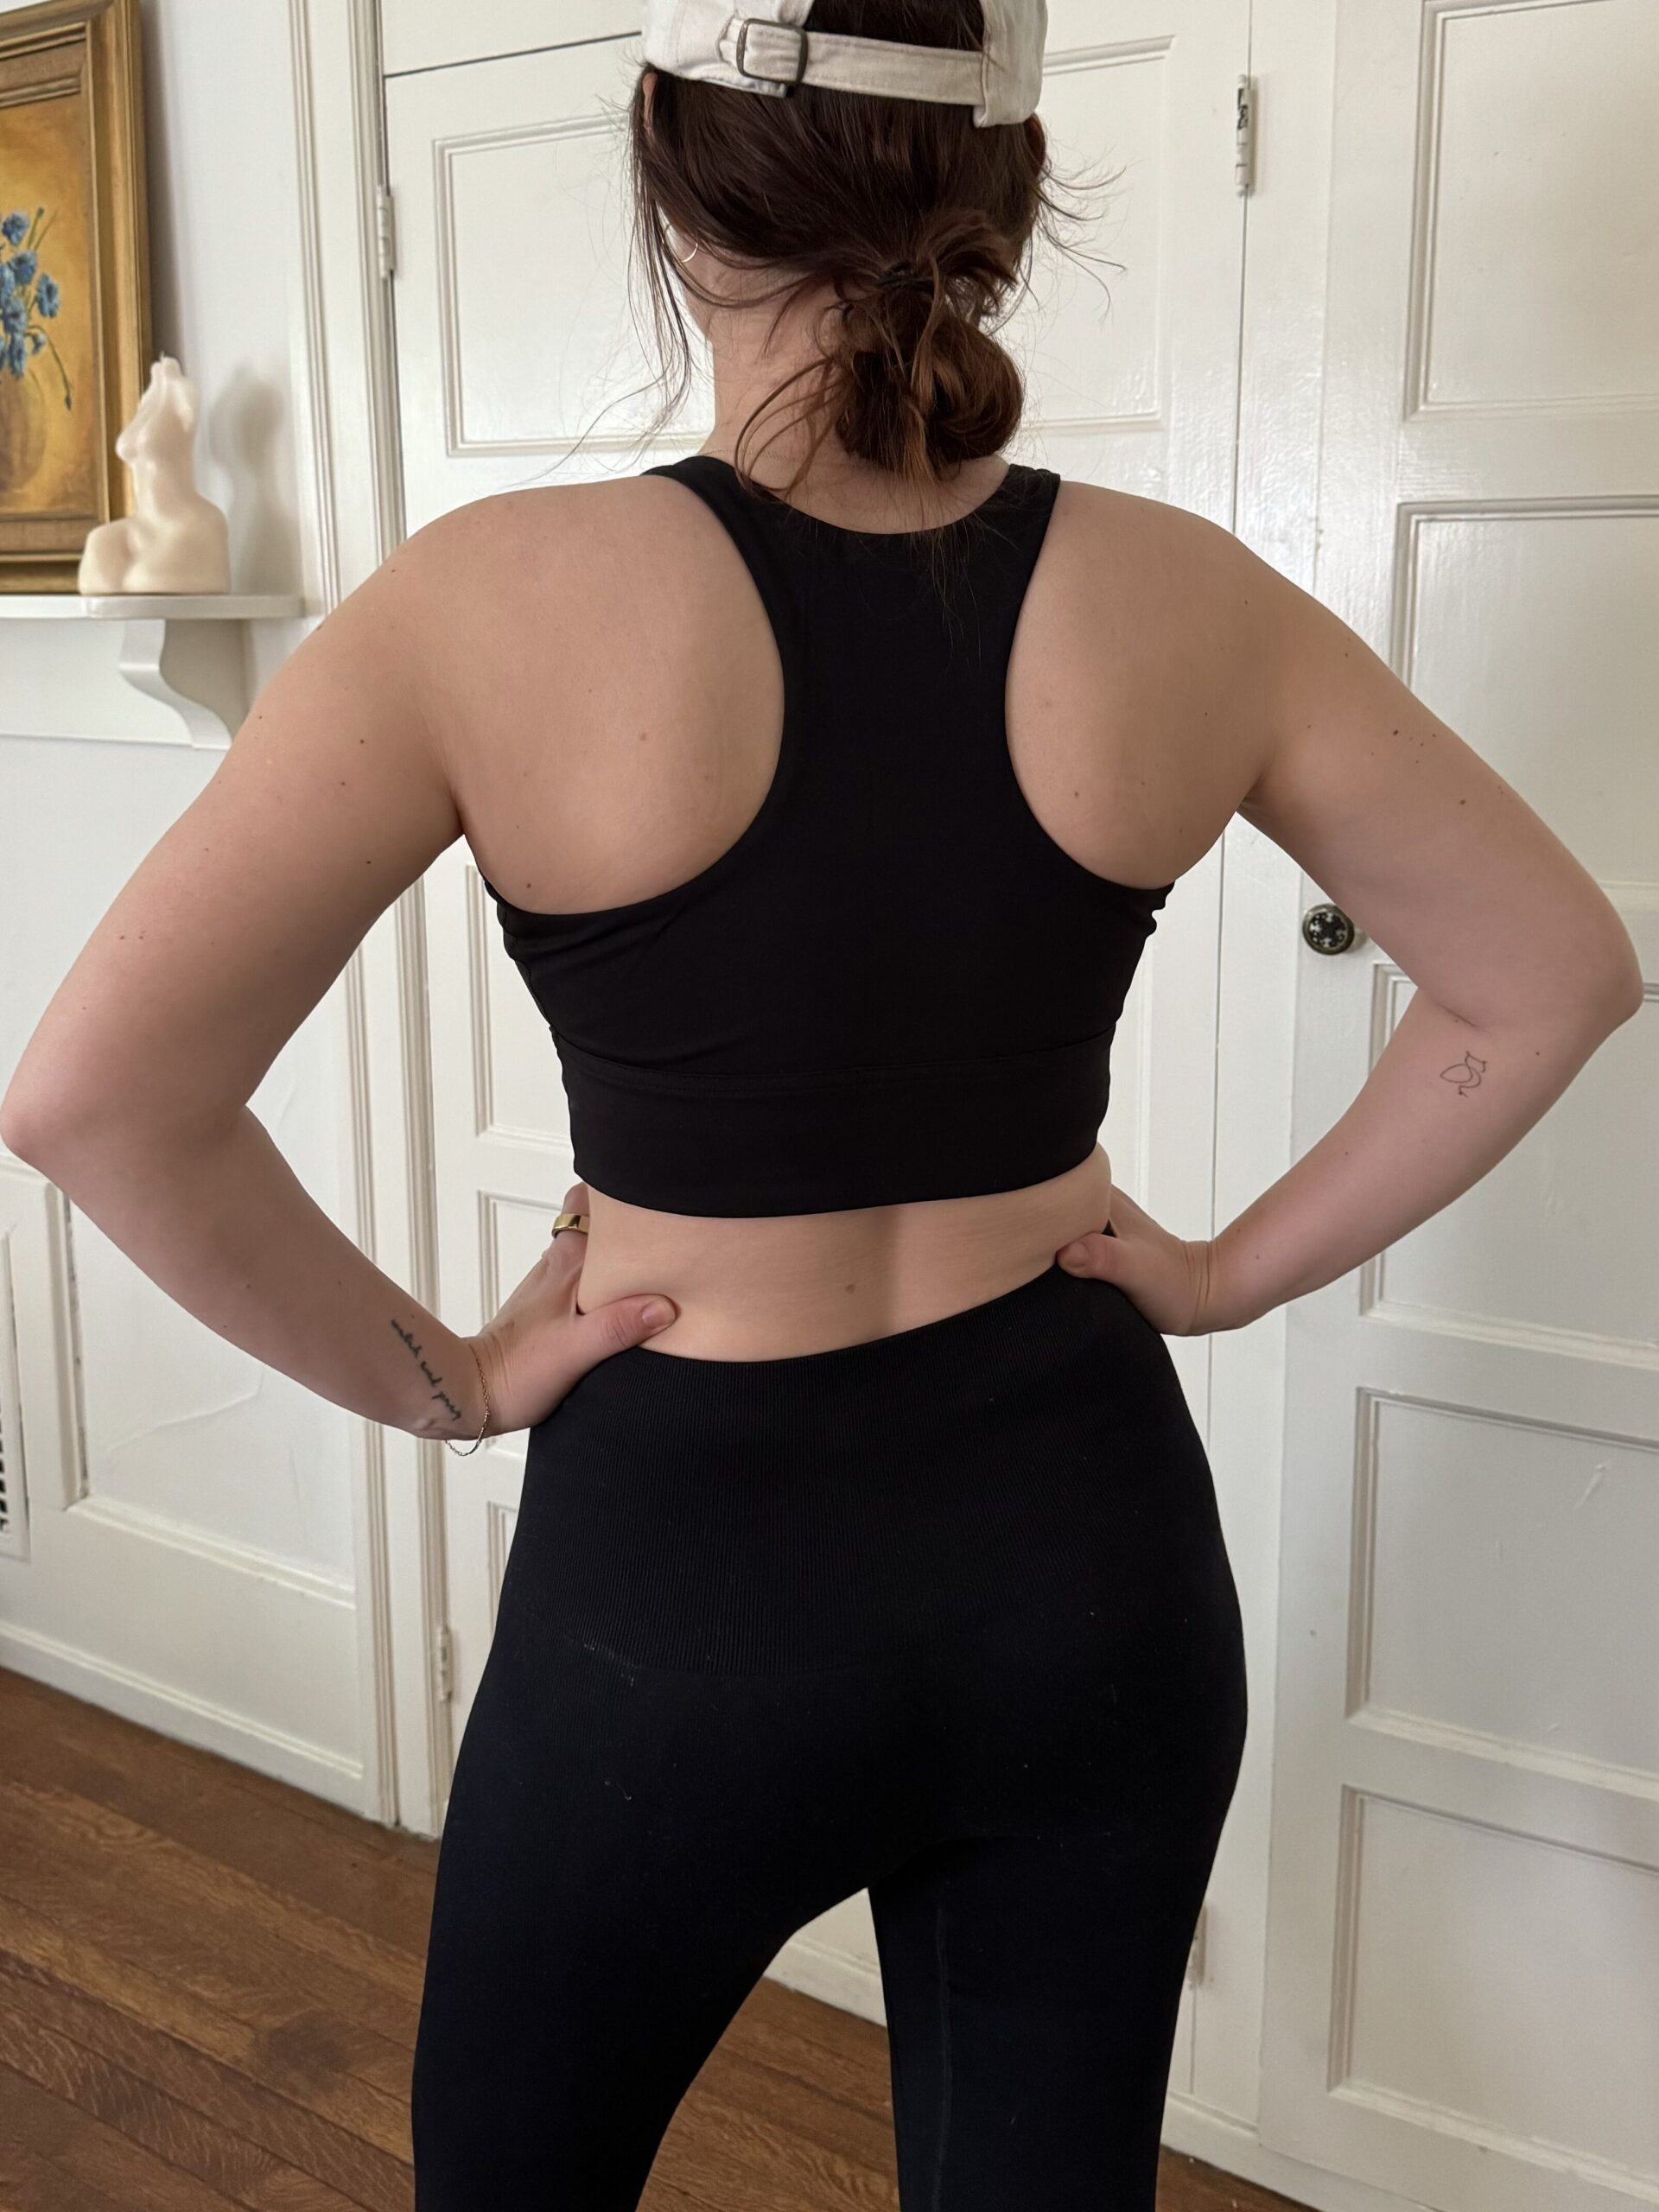 Woman wearing black sports bra and leggings, viewed from the back, standing in a room with white doors.